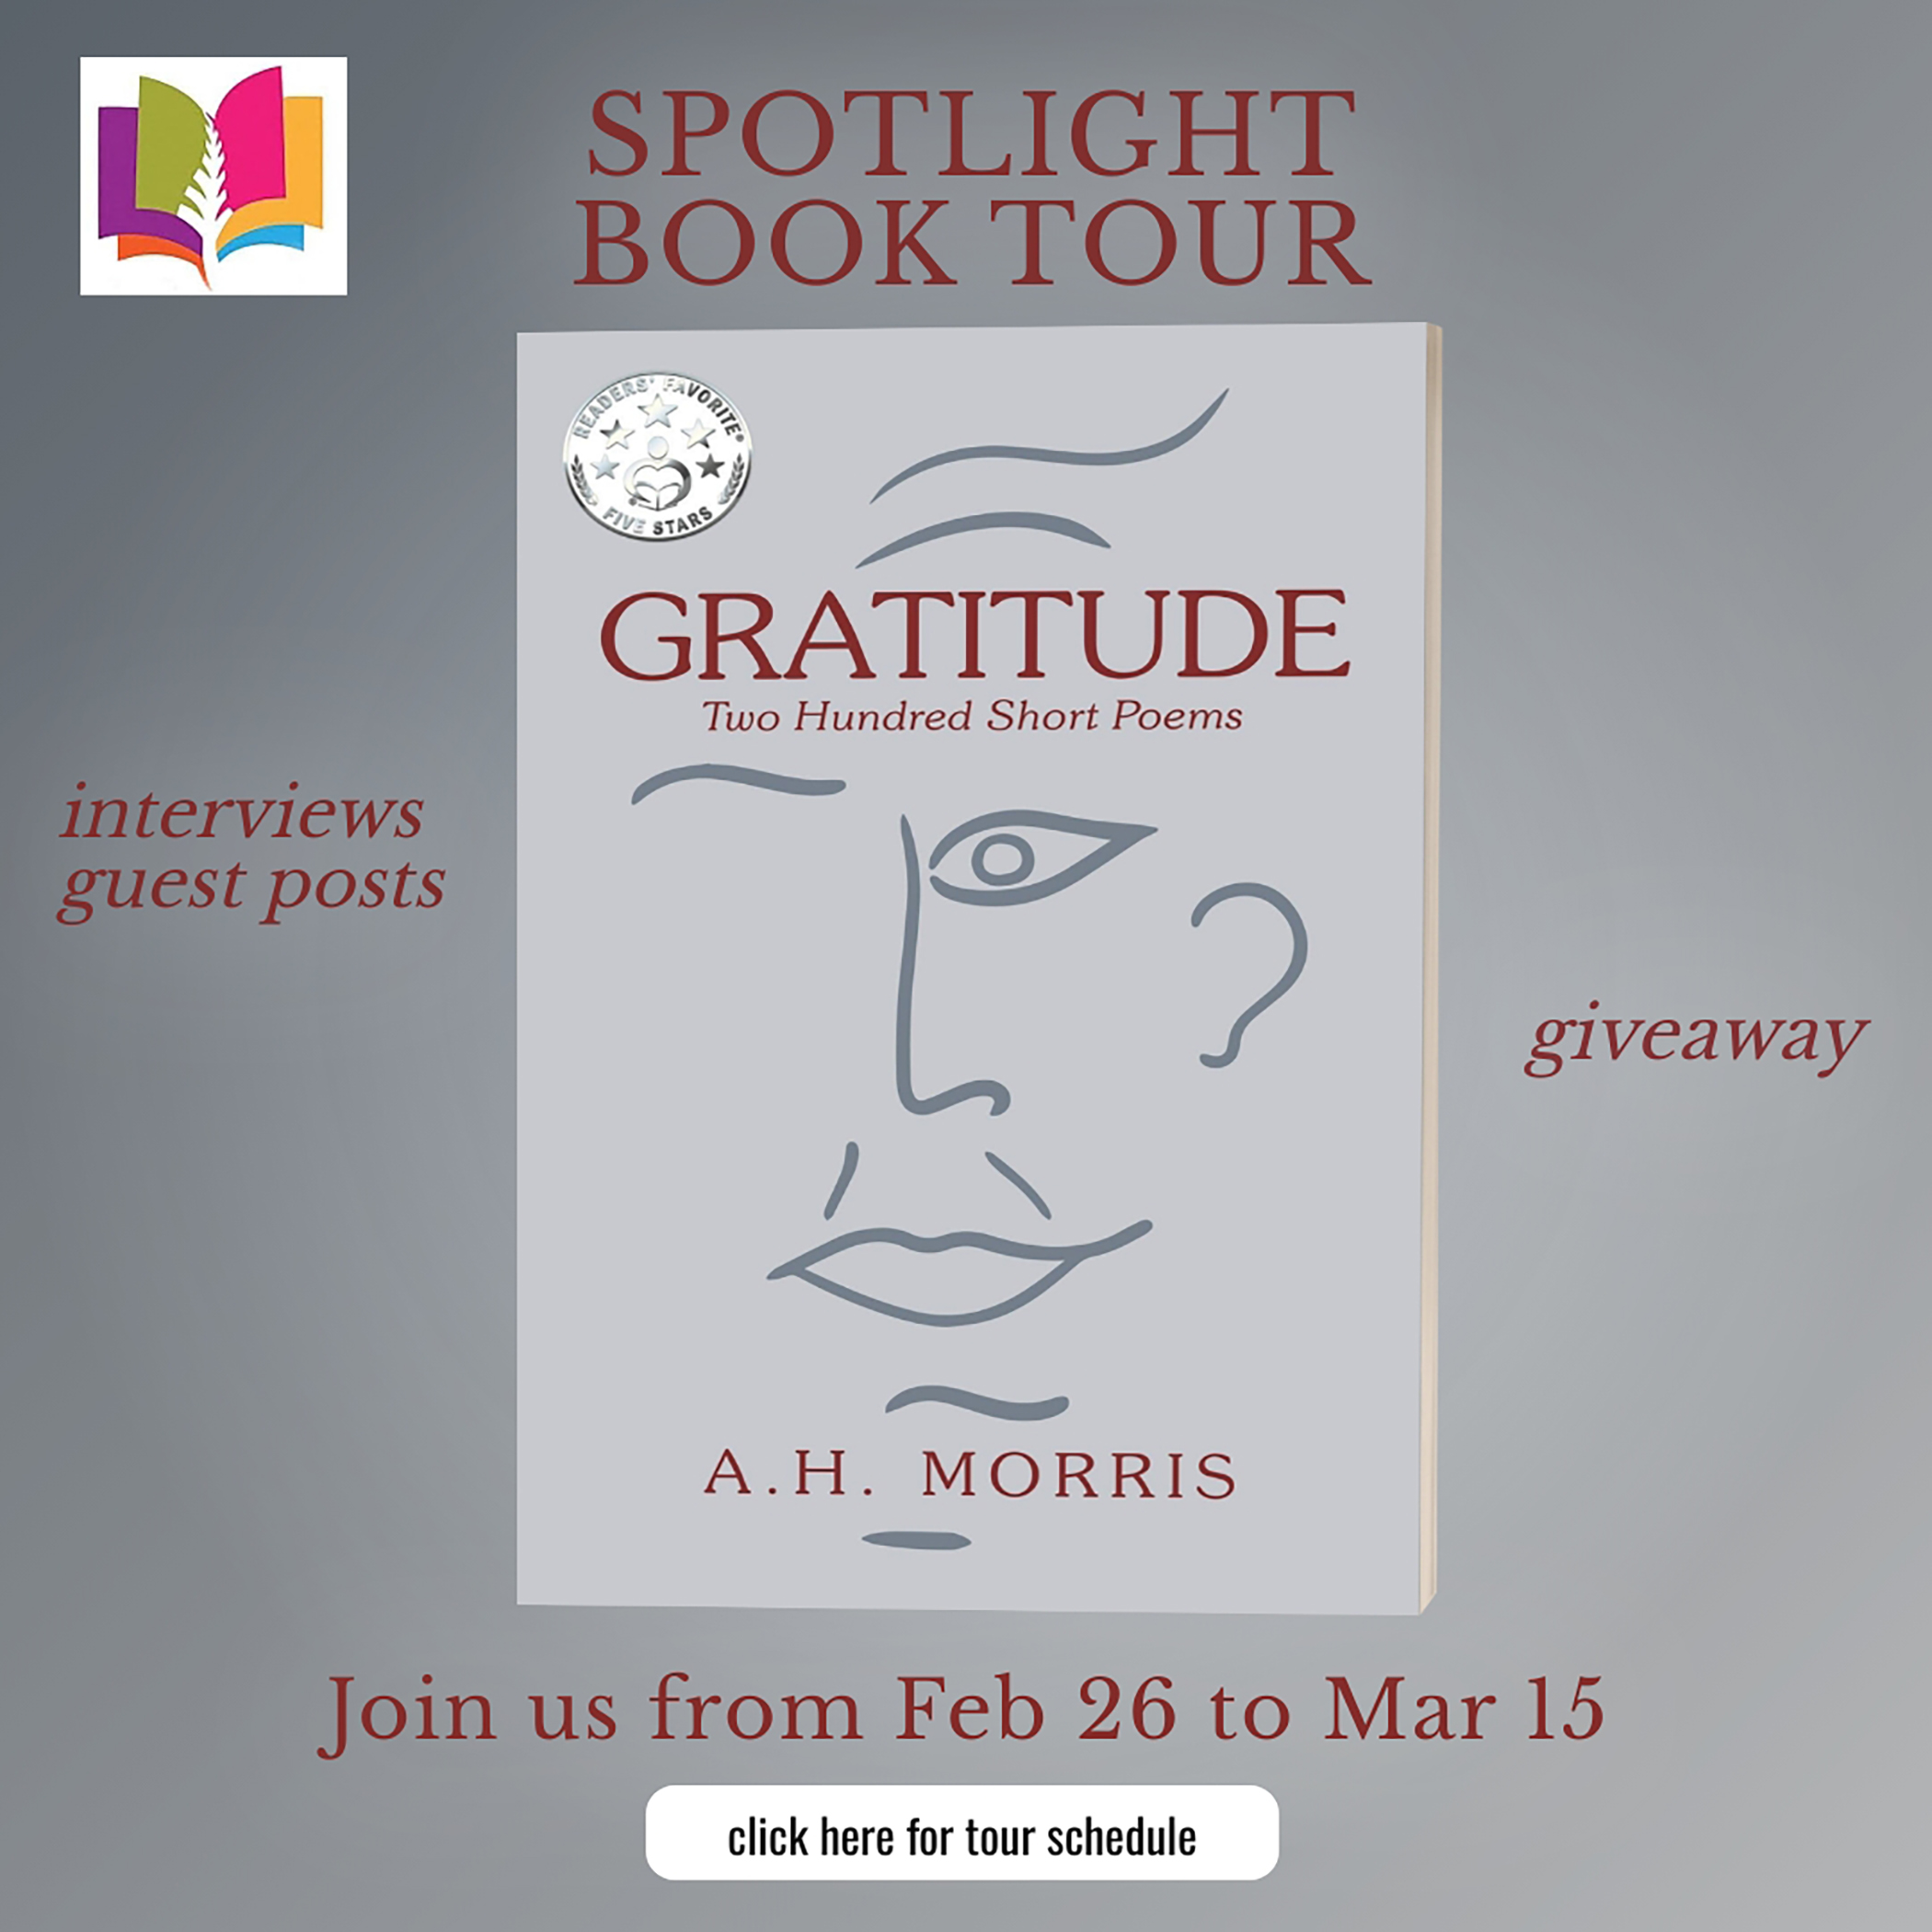 Spotlight on "Gratitude: Two Hundred Short Poems" by A. H. Morris featuring an author guest post! ($25 Starbucks card & signed book available)